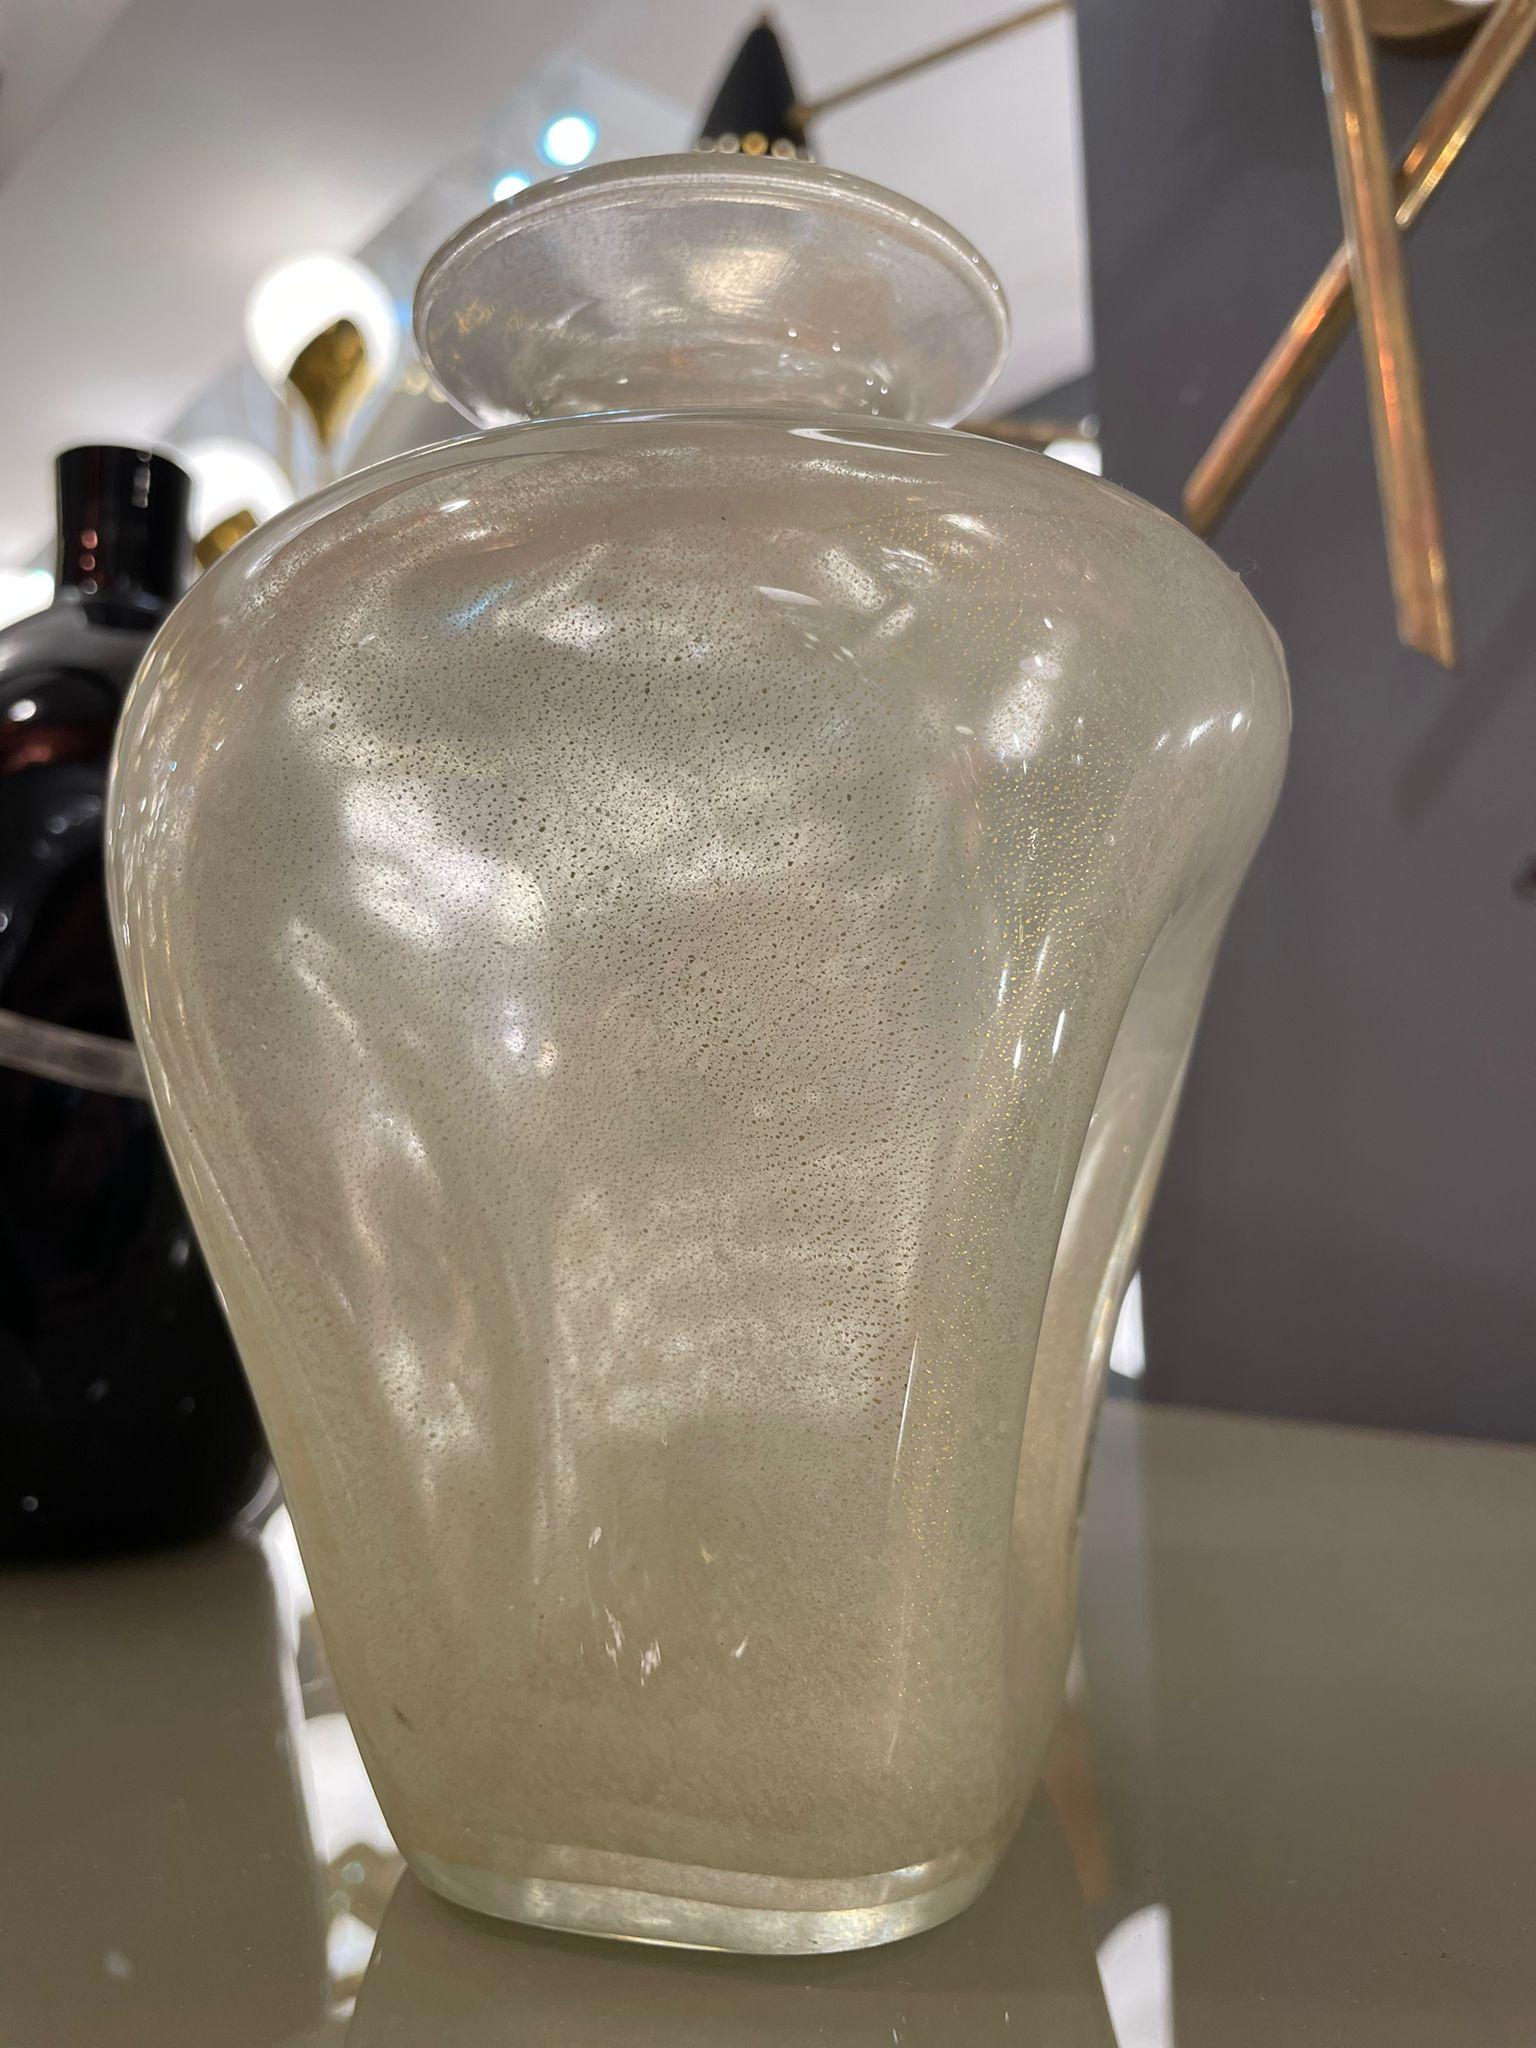 Mid-20th Century Italian Murano Glass Vase with Gold Inclusion by Barovier & Toso, circa 1950 For Sale